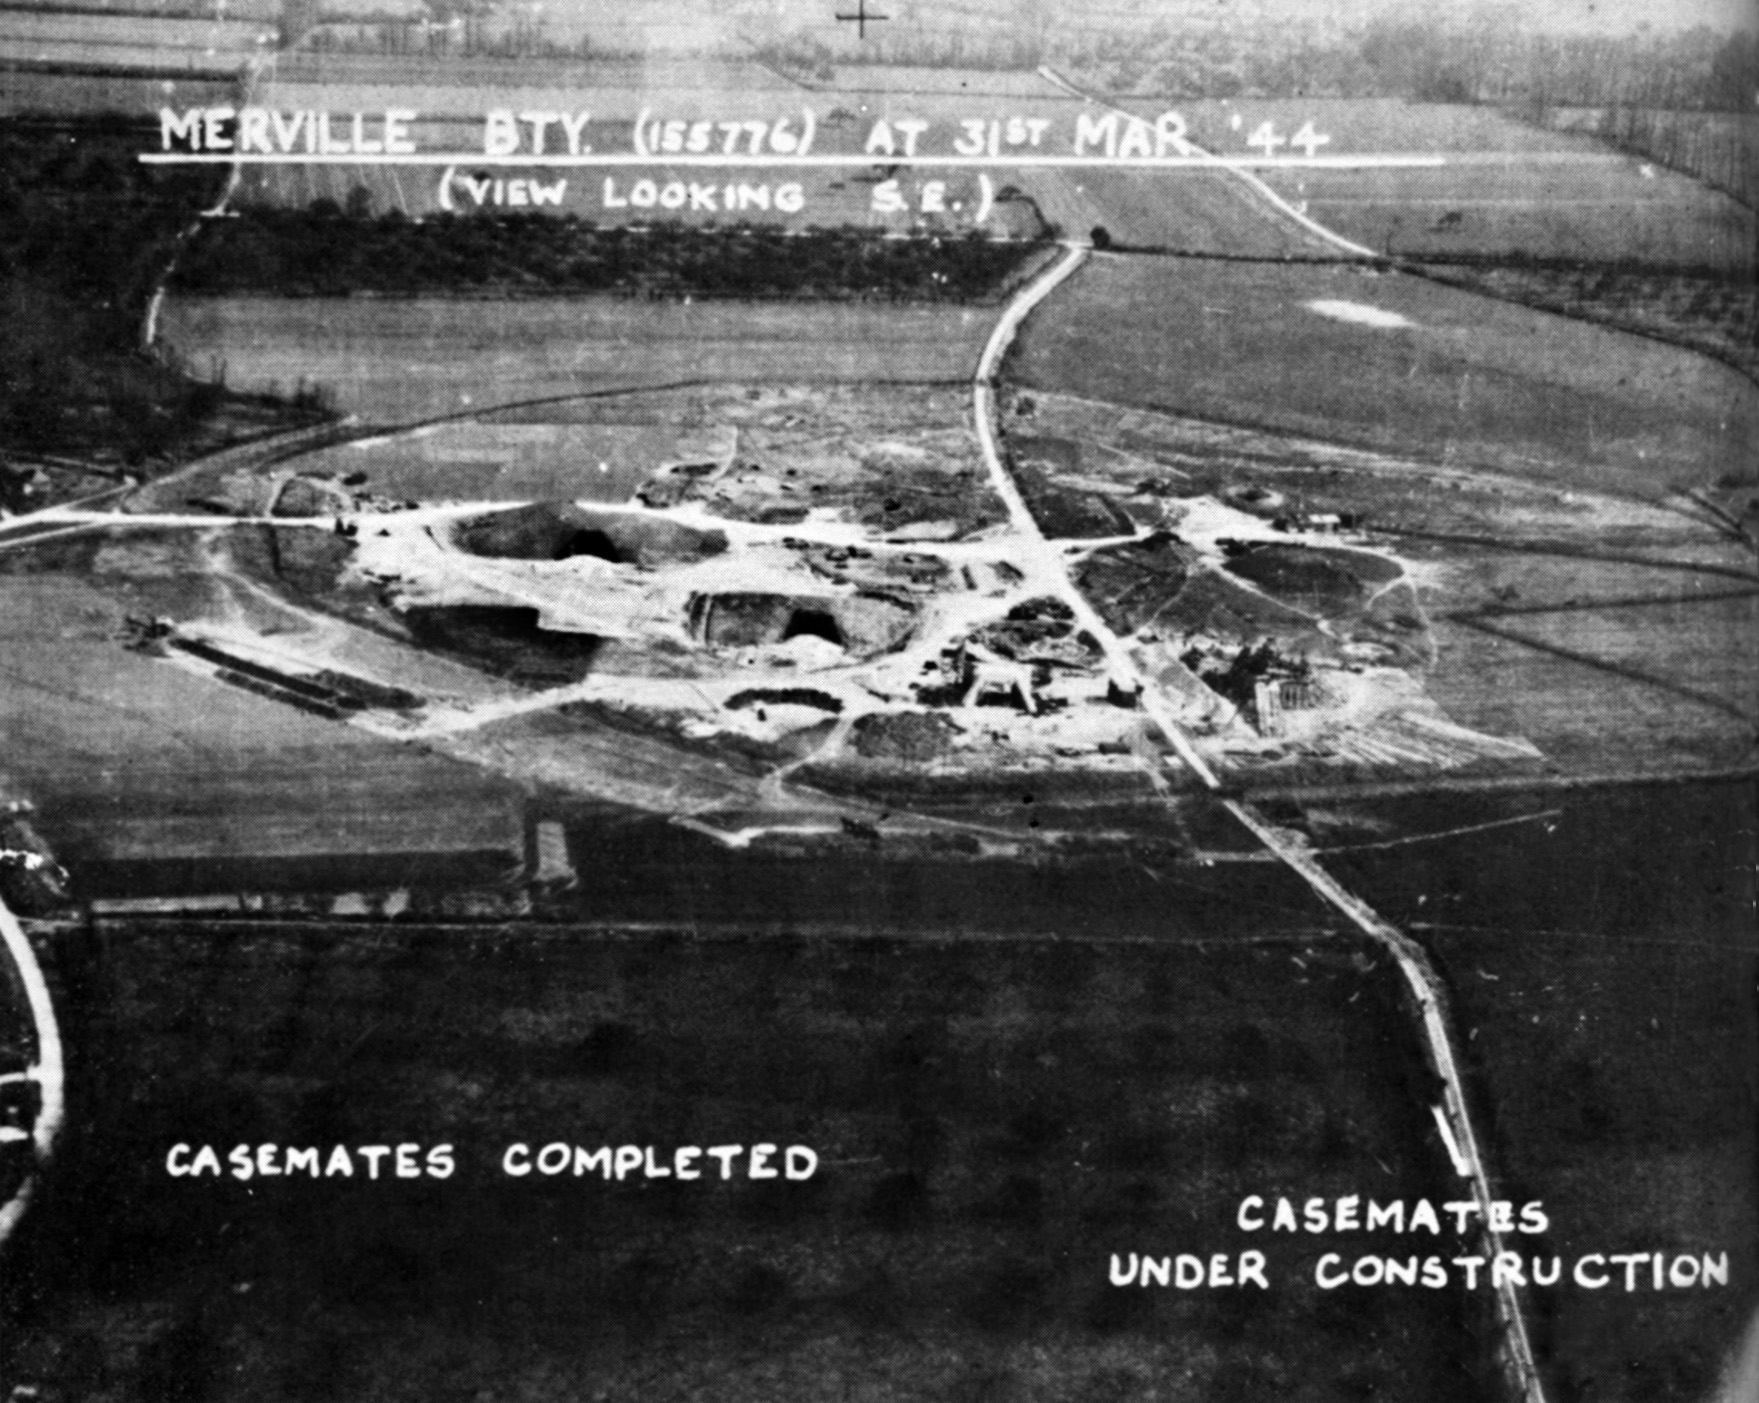 British reconnaissance photo taken in March 1944 of the Merville Battery under construction near Sword Beach, Normandy. Two casemates on the left are completed, the two on right still being built. 